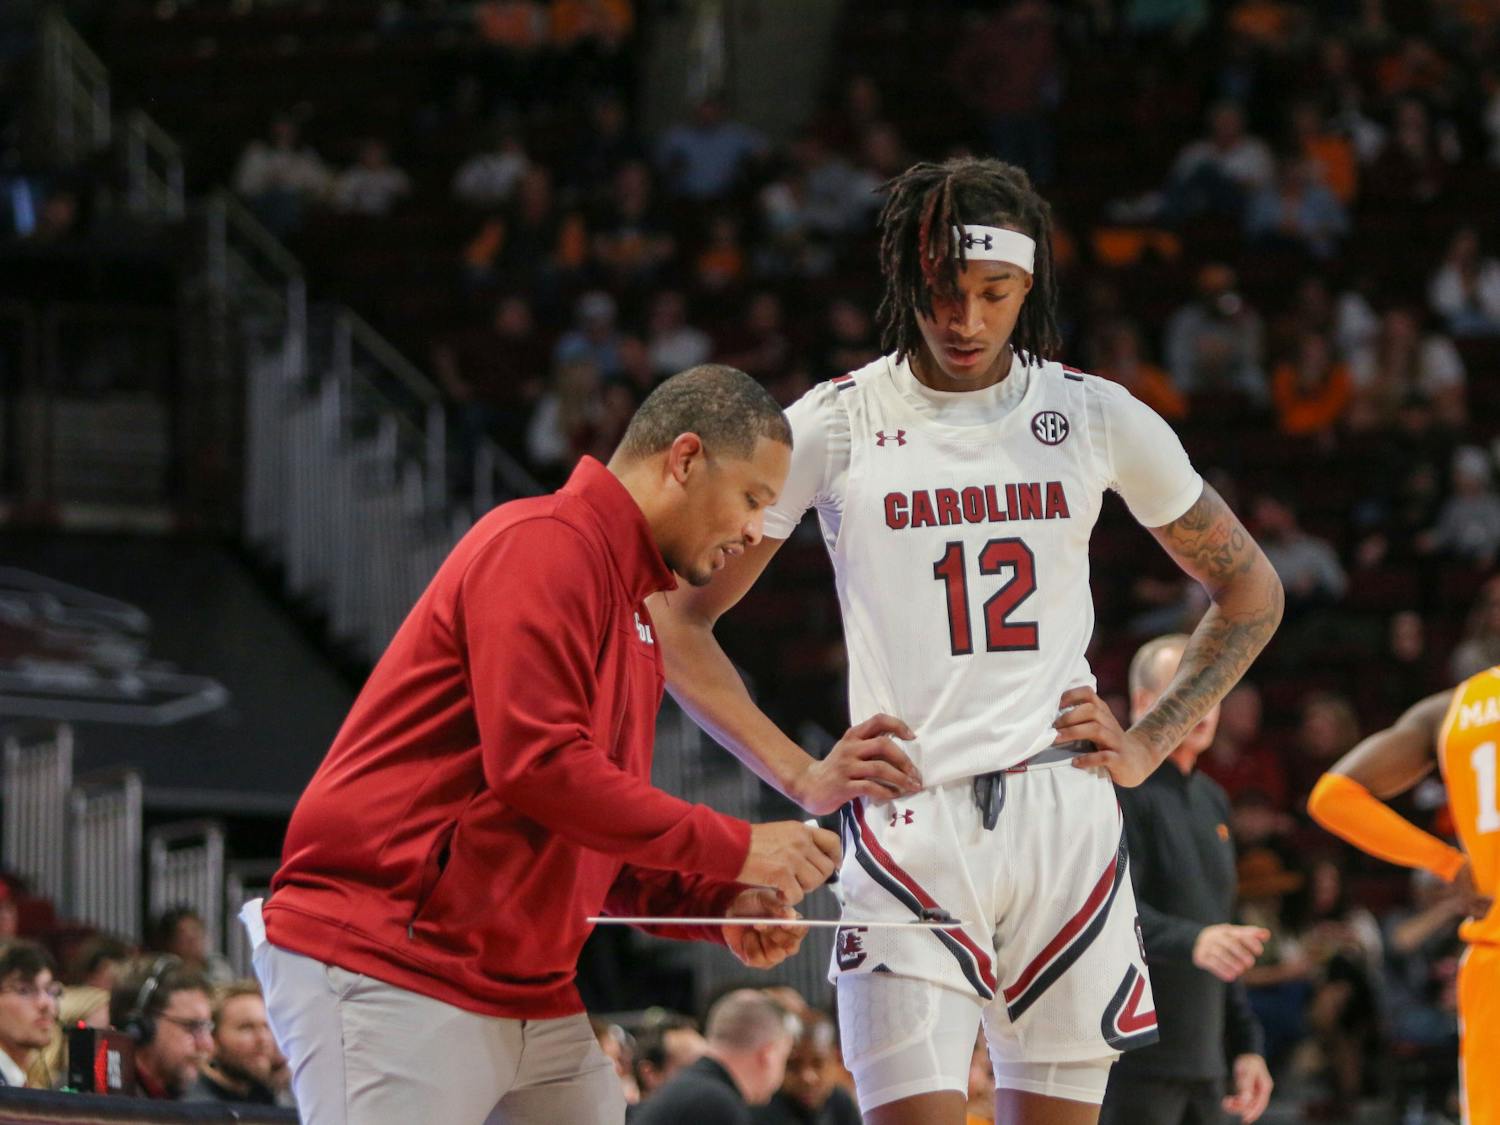 Freshman guard Zachary Davis gets instructions from head coach Lamont Paris on Jan. 7th, 2023. The Gamecocks lost to the Volunteers 85-42.